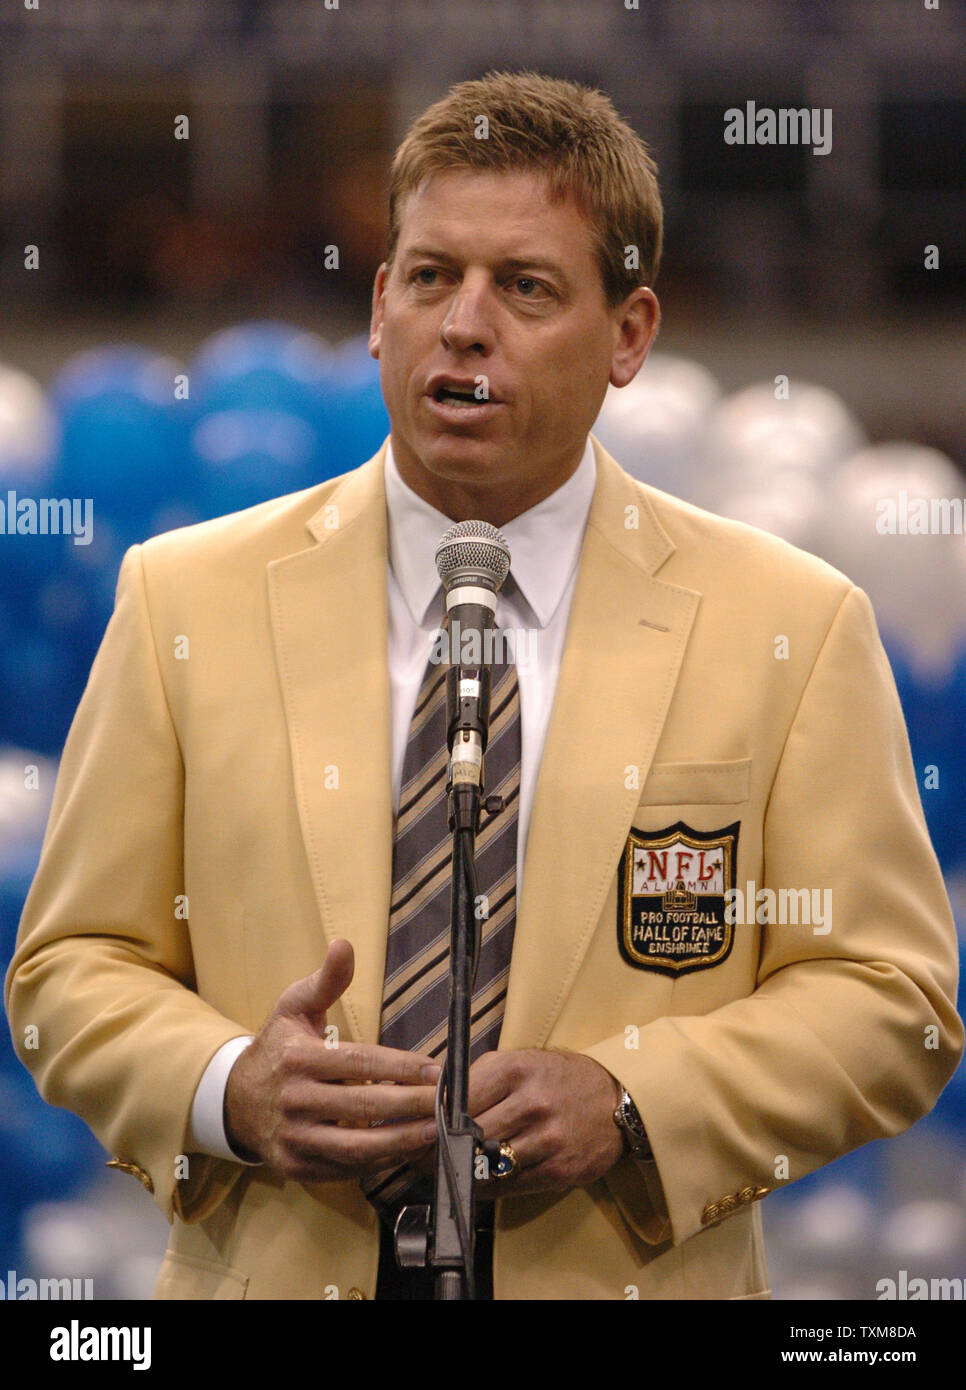 former-dallas-cowboys-quarterback-troy-aikman-talks-about-his-playing-days-days-during-a-special-halftime-celebration-at-texas-stadium-in-irving-tx-on-october-23-2006-aikman-was-presented-with-his-nfl-hall-of-fame-ring-upi-photoian-halperin-TXM8DA.jpg